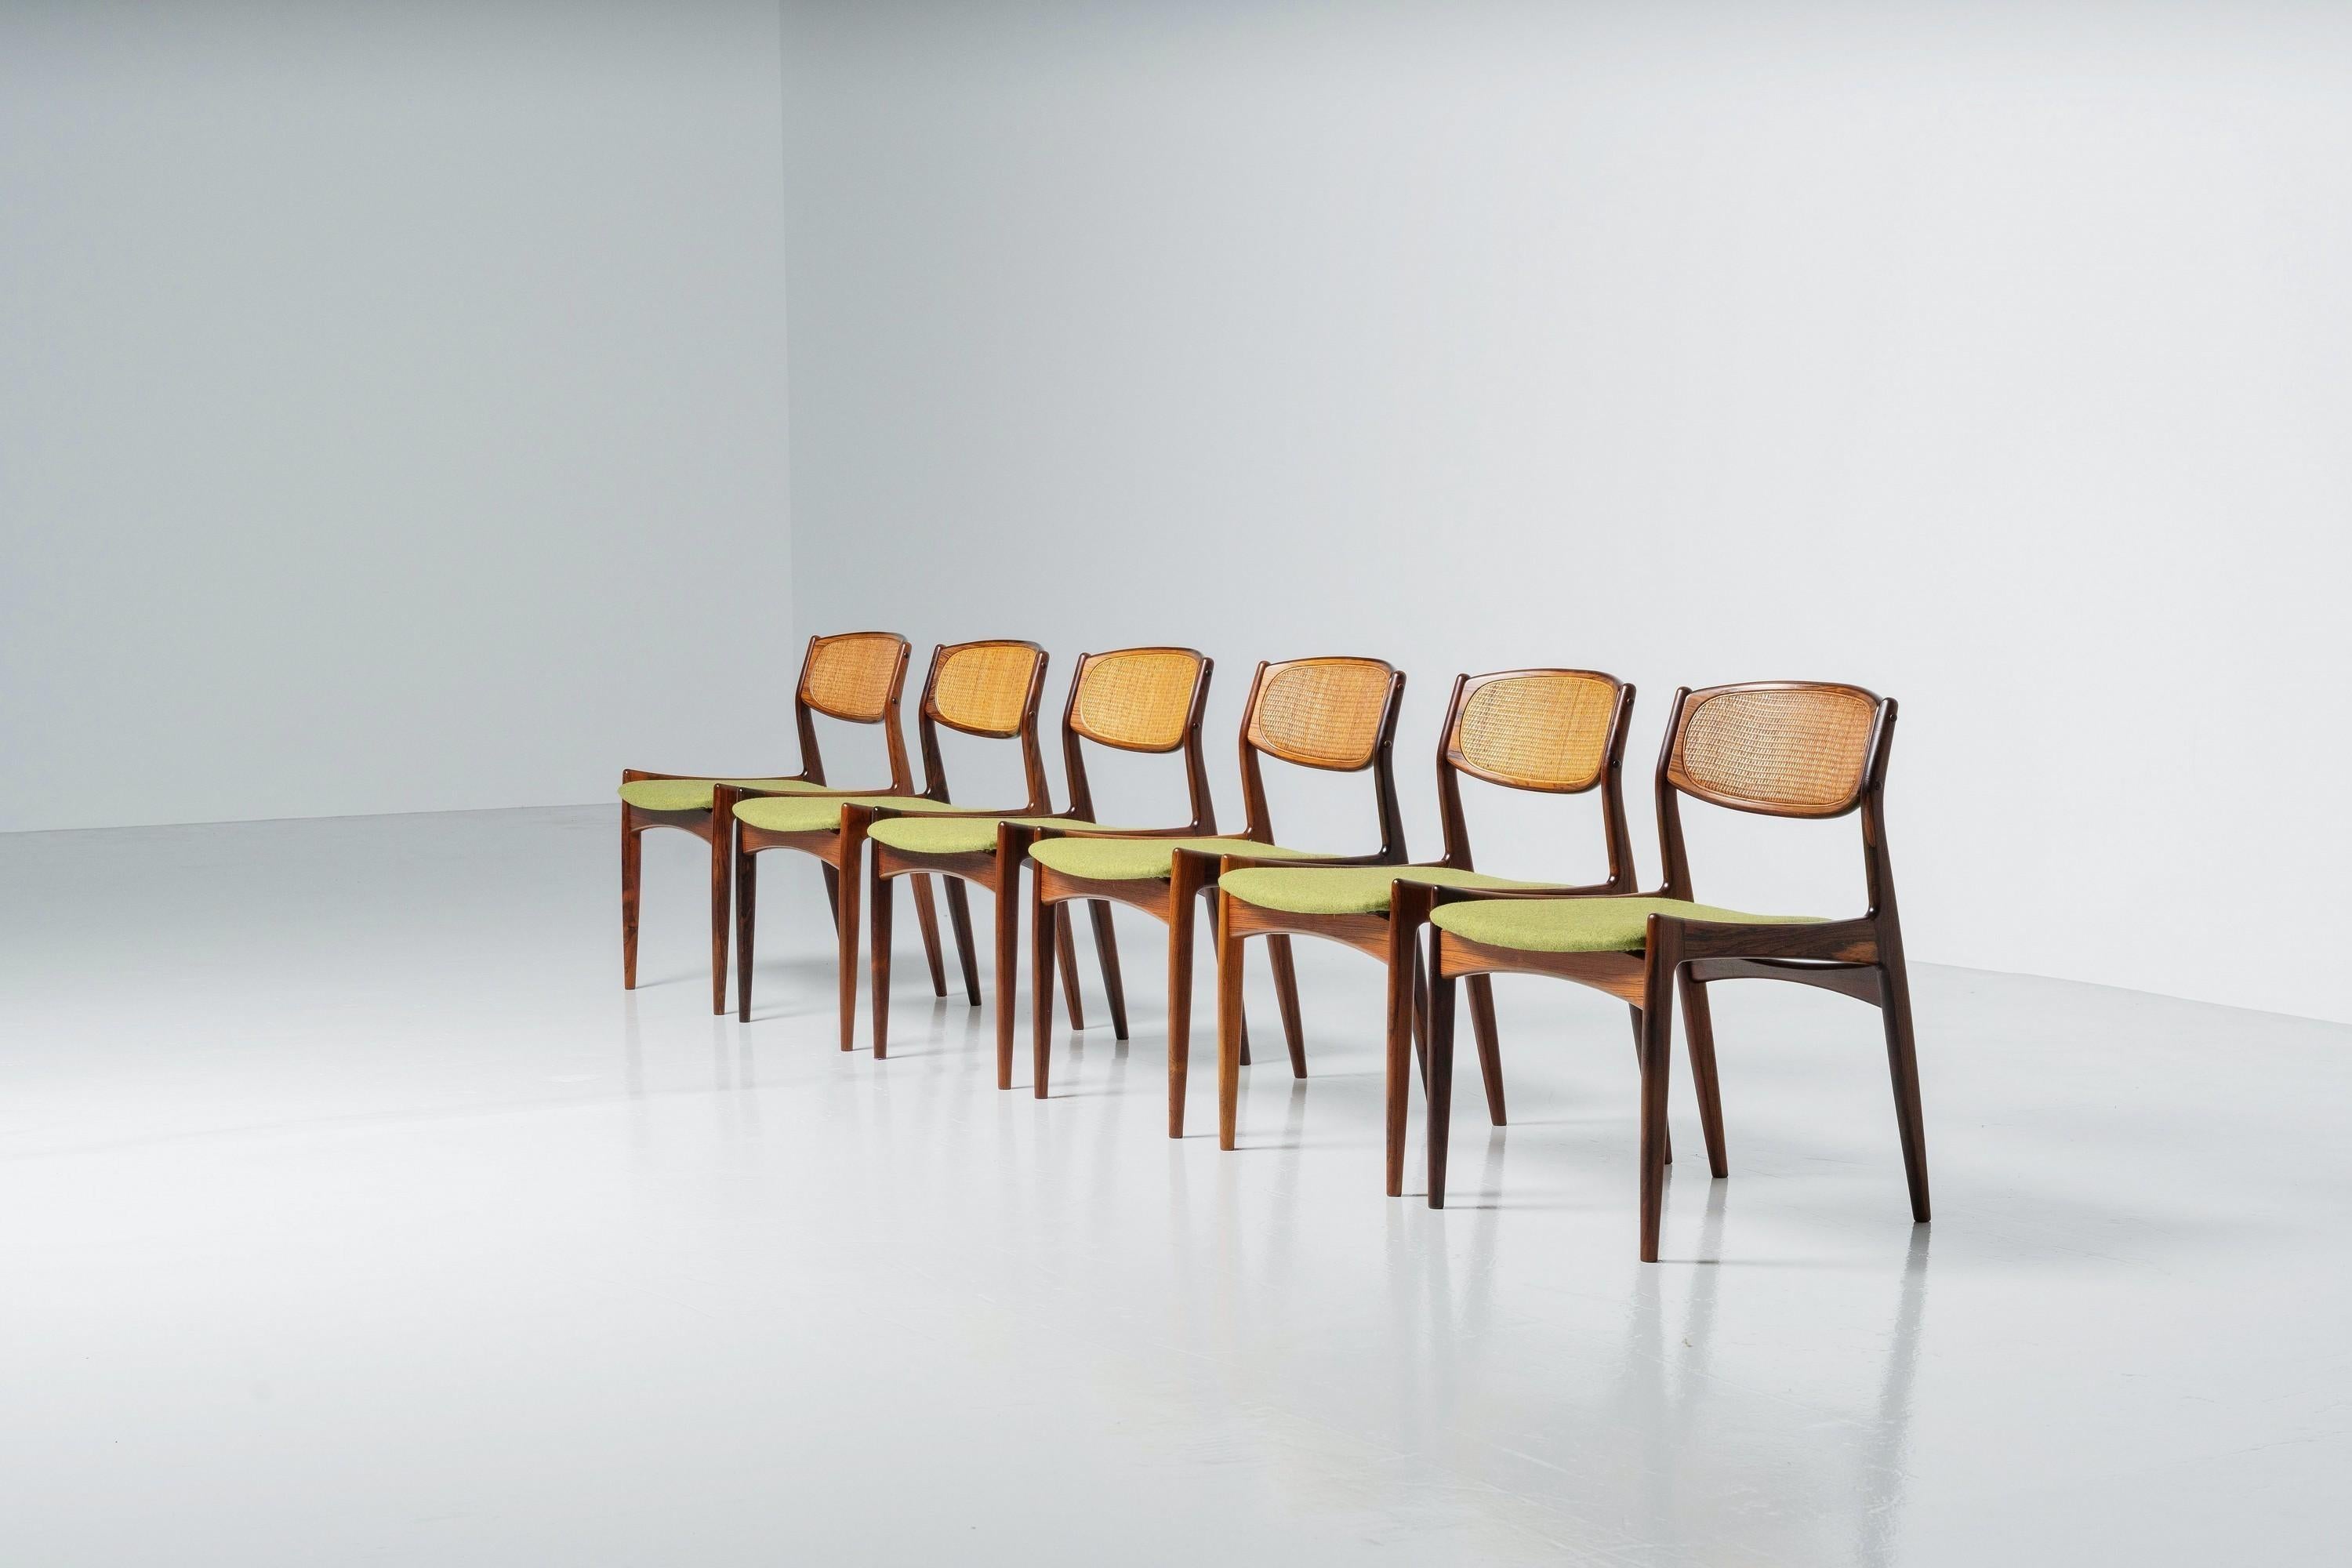 Very great set of 6 Model 4325 dining chairs, by designer Ib Kofod Larsen en produced in Denmark by Christian Linneberg in 1960. The chairs are still in a very good condition and have a remarkable mix of eclectic materials; a rosewood base, and